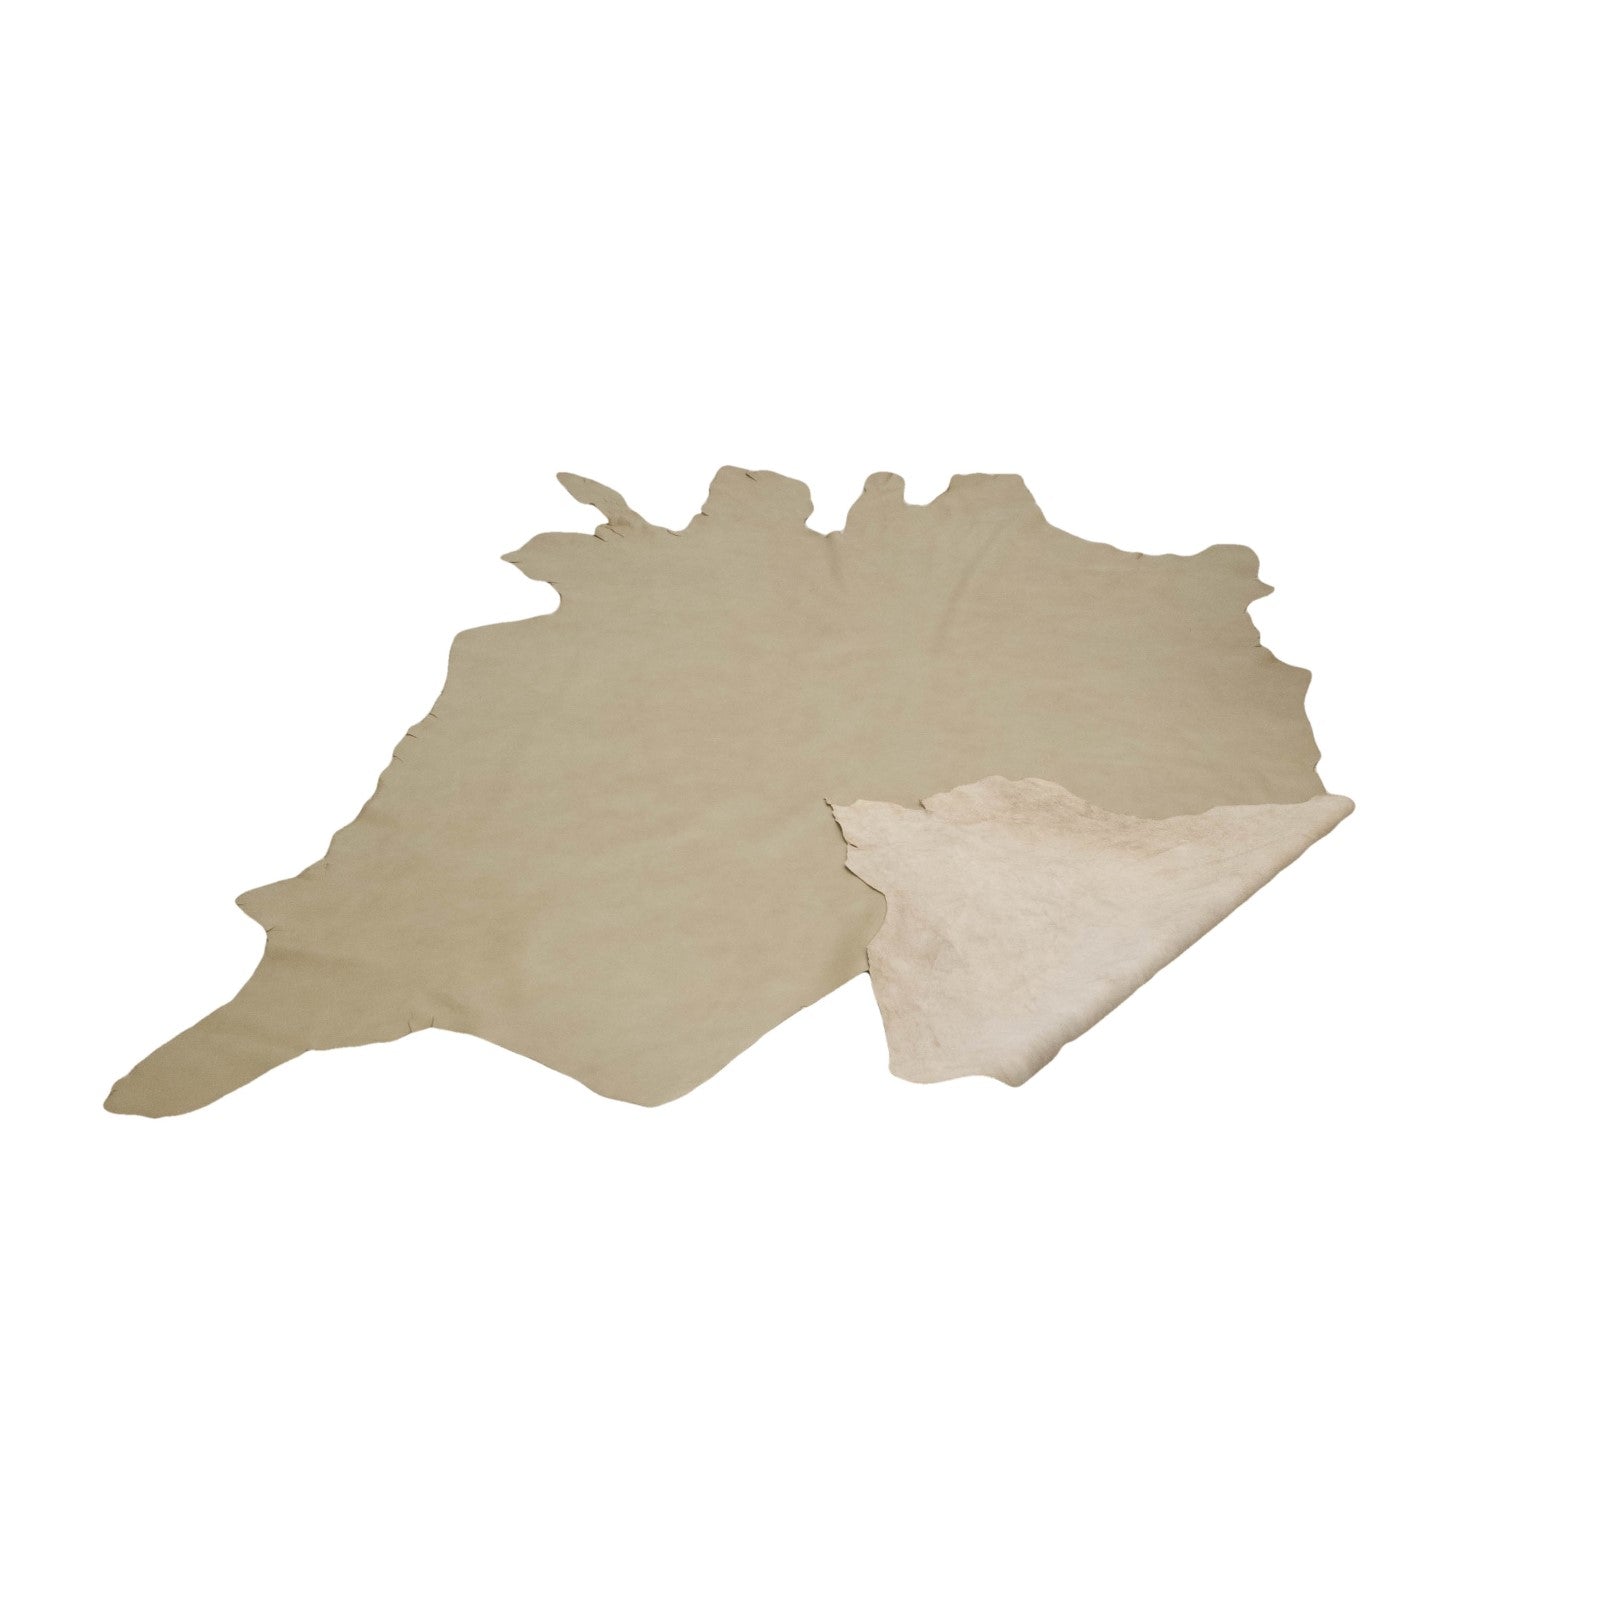 True Taupe, 3-4 oz, 48-57 Sq Ft, Cow Upholstery Full Hides,  | The Leather Guy